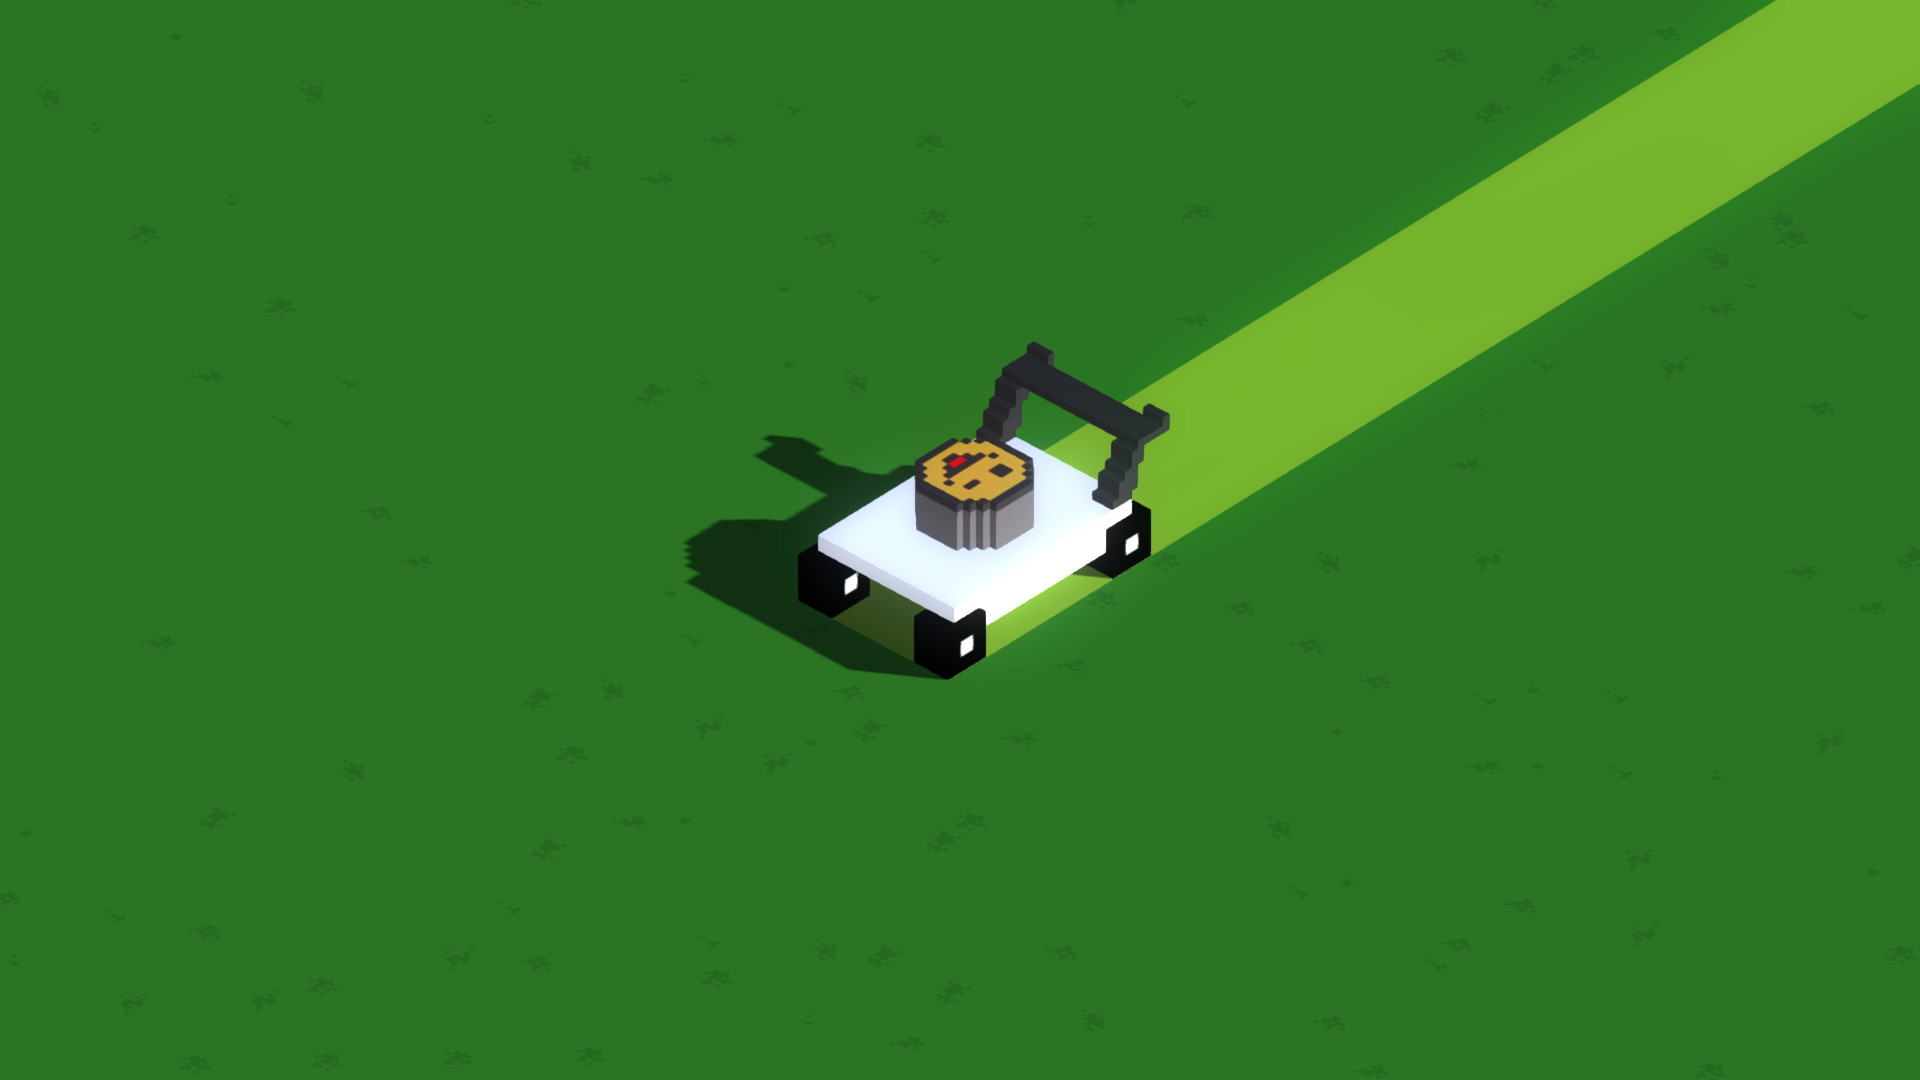 Grass Cutter - White Lawn Mowers: Smiles Pack Featured Screenshot #1